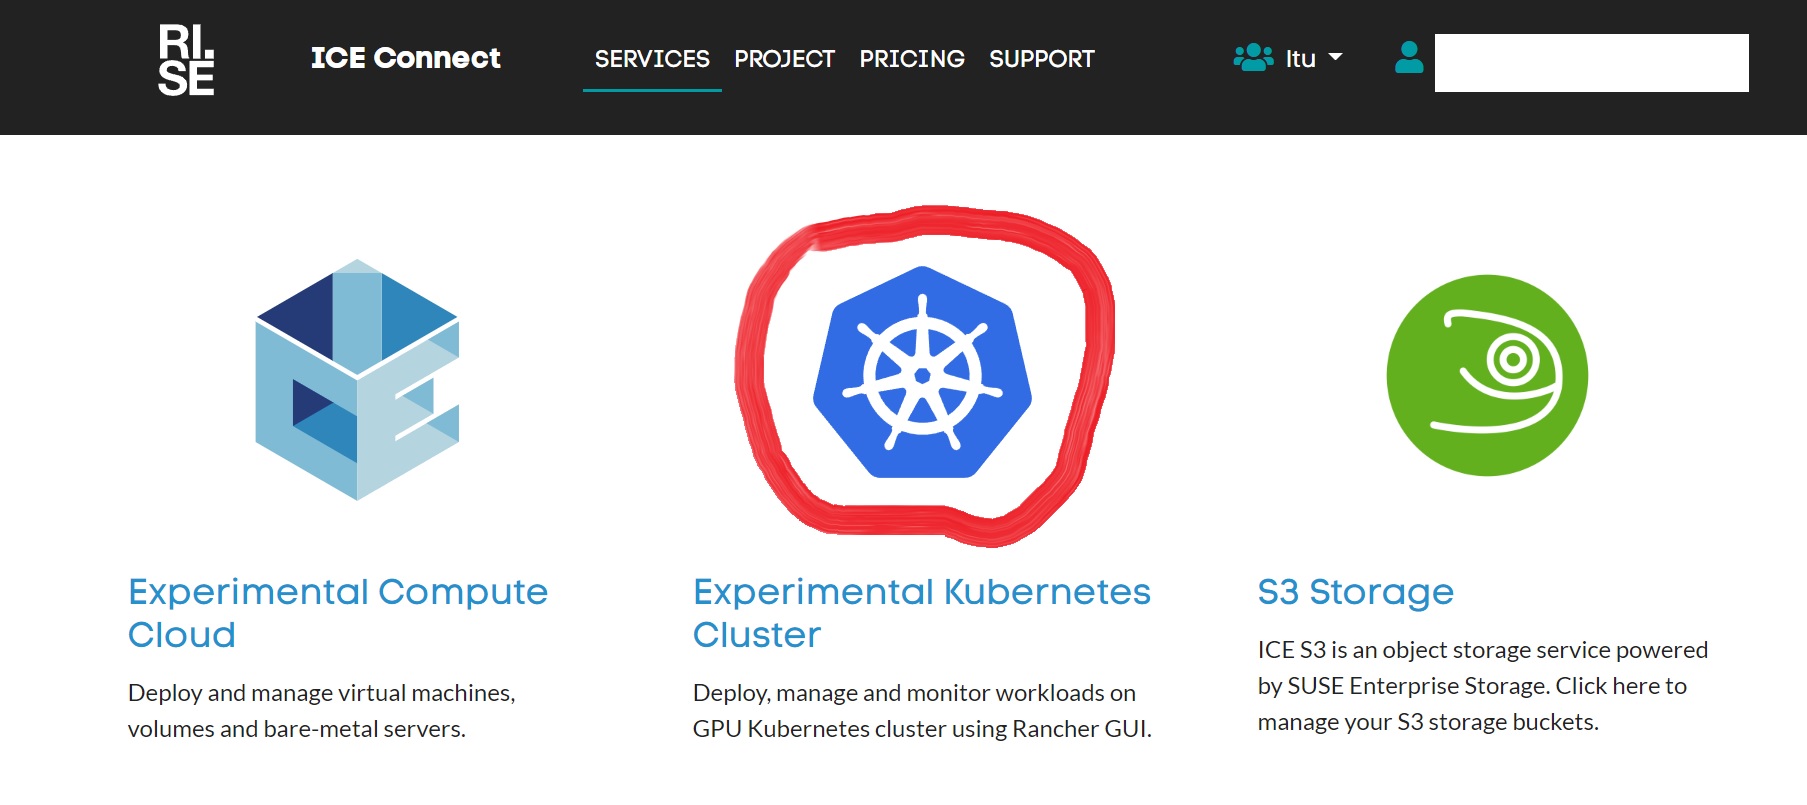 Click on the Experimental Kubernetes cluster